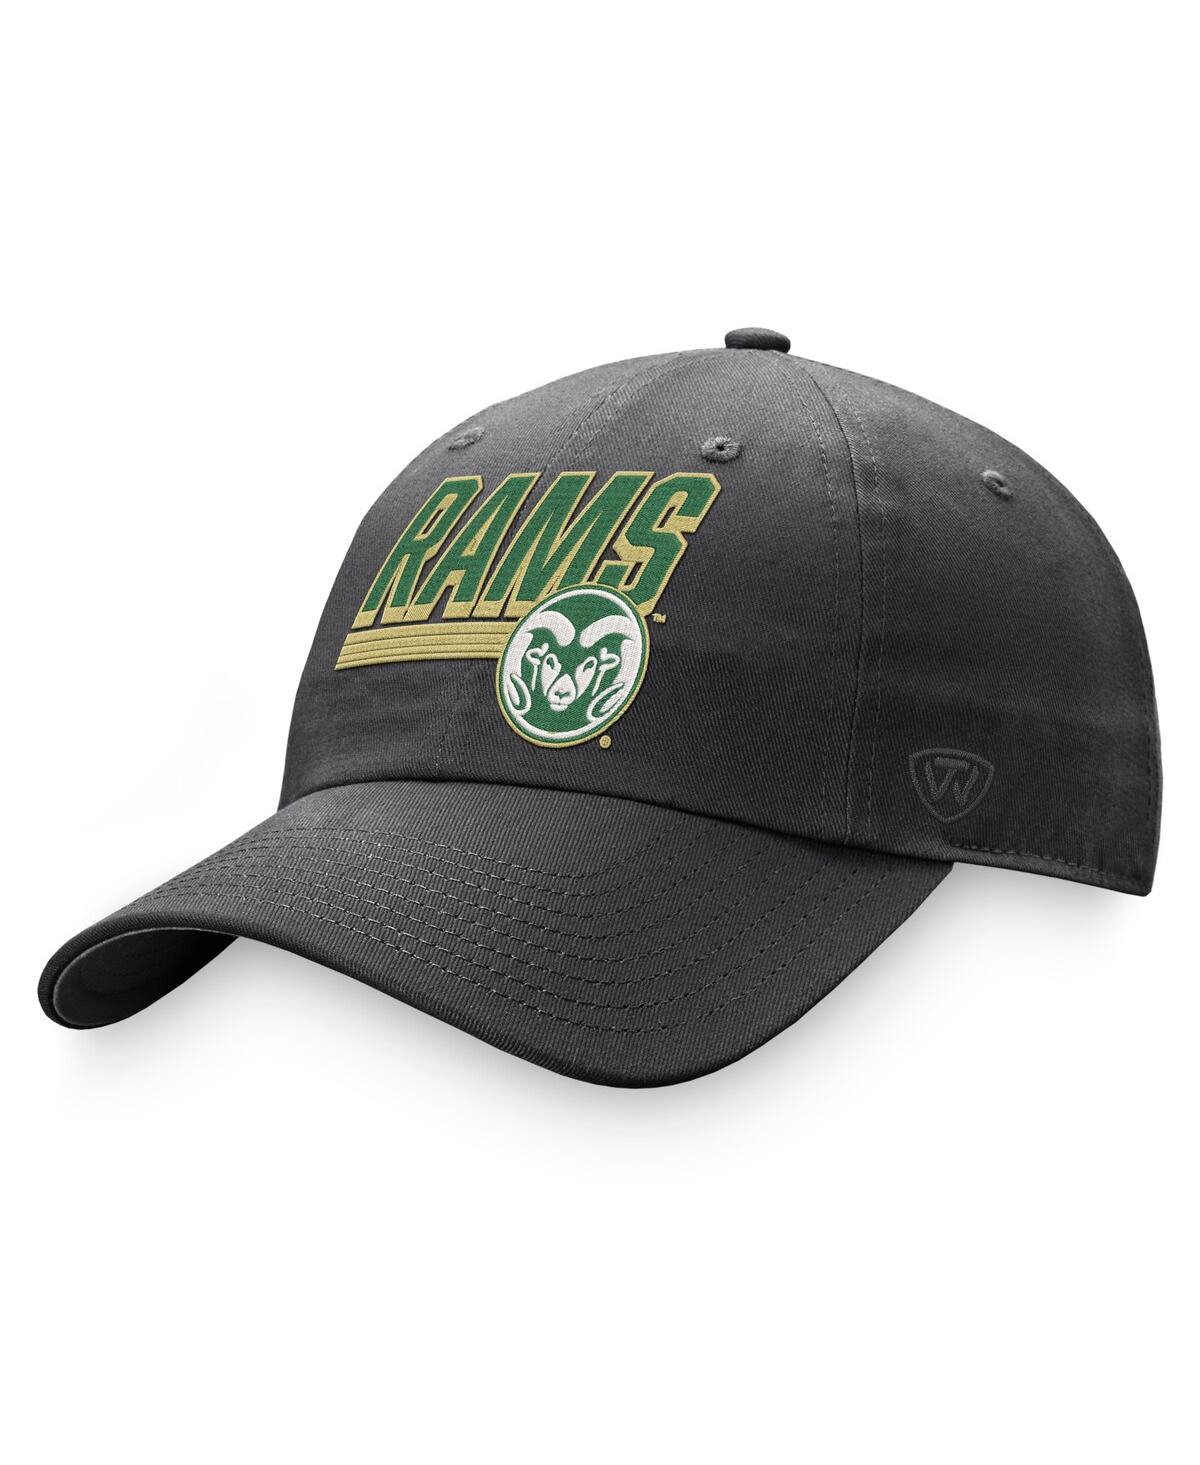 Shop Top Of The World Men's  Charcoal Colorado State Rams Slice Adjustable Hat